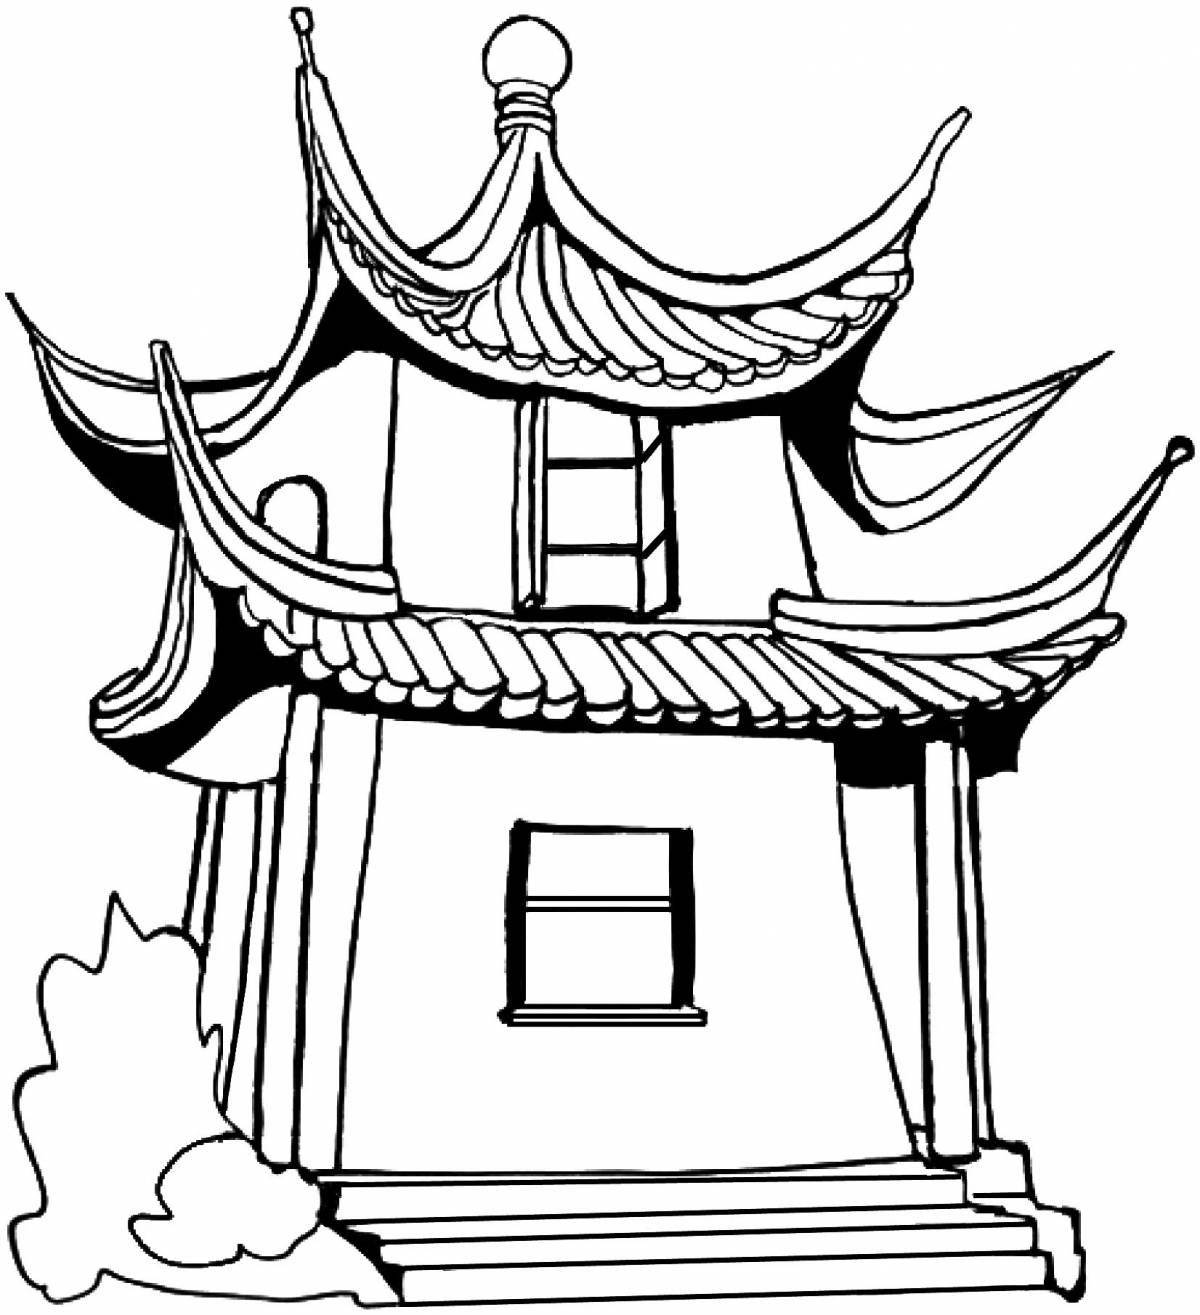 A brightly colored Chinese temple coloring book